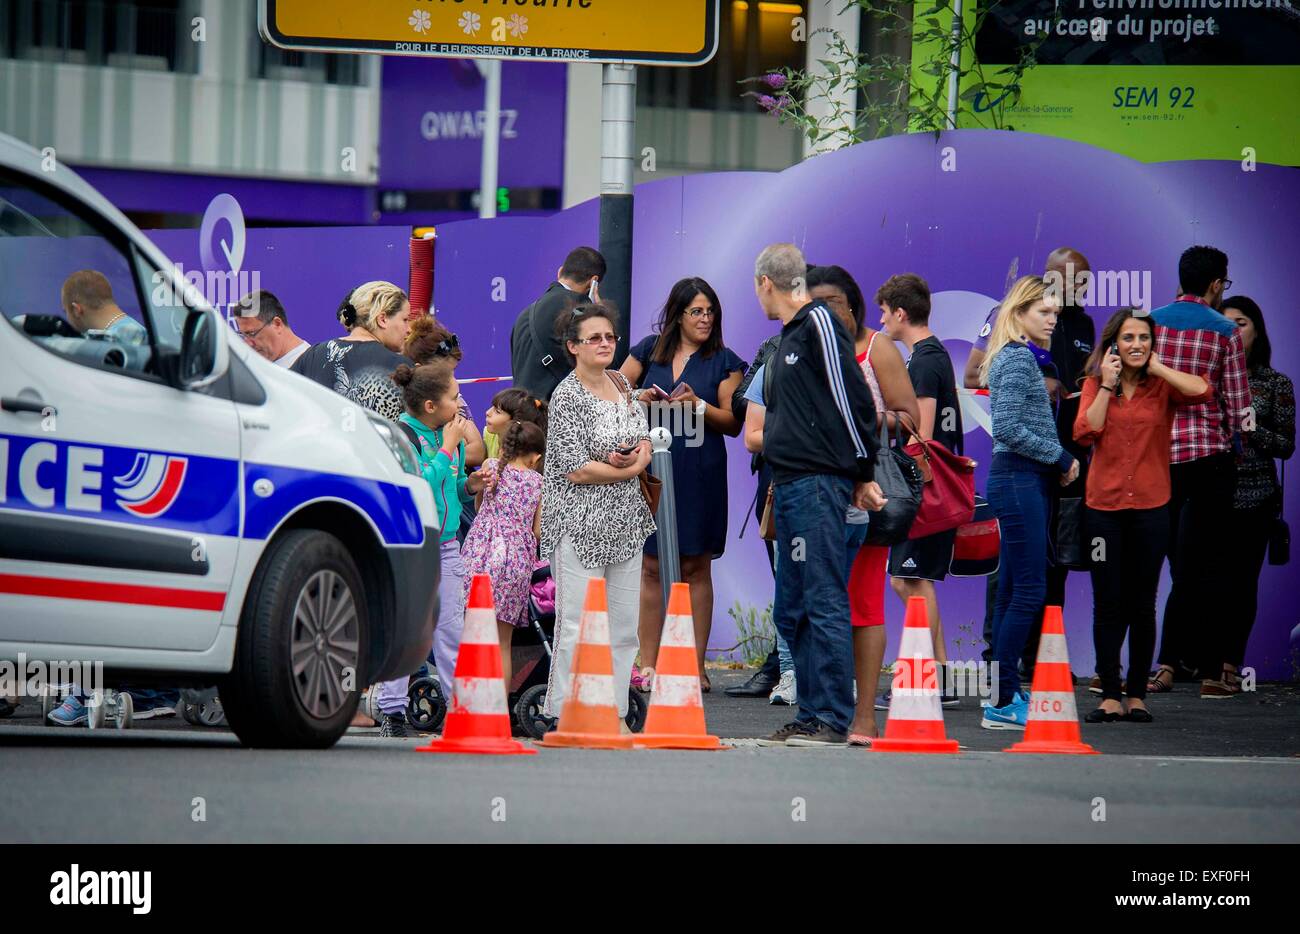 Paris, France. 13th July, 2015. People gather outside the site of a hostage helding in Paris, France, July 13, 2015. About 18 people have been evacuated from the shopping center where gunmen held employees hostage Monday morning in Villeneuve-la-Garenne, west Paris, police said. Credit:  Chen Xiaowei/Xinhua/Alamy Live News Stock Photo